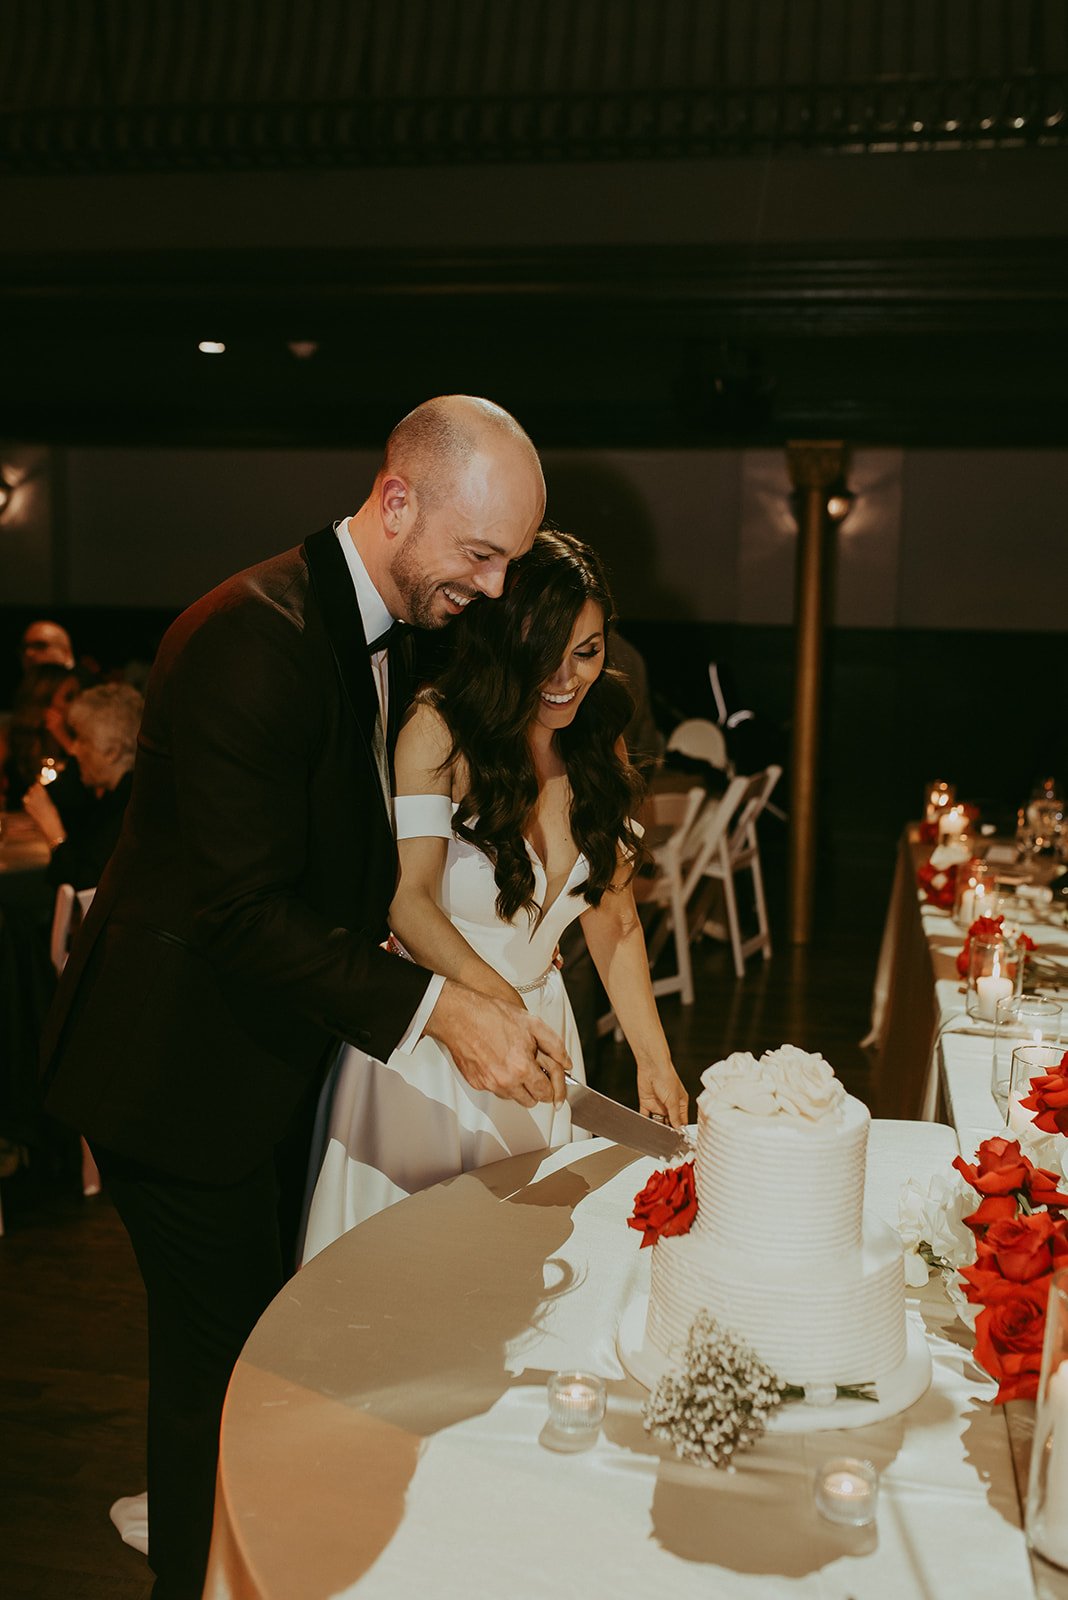 The-Great-Hall-October-Fall-wedding-Queen-West-reception-bride-groom-cake-cutting.jpg